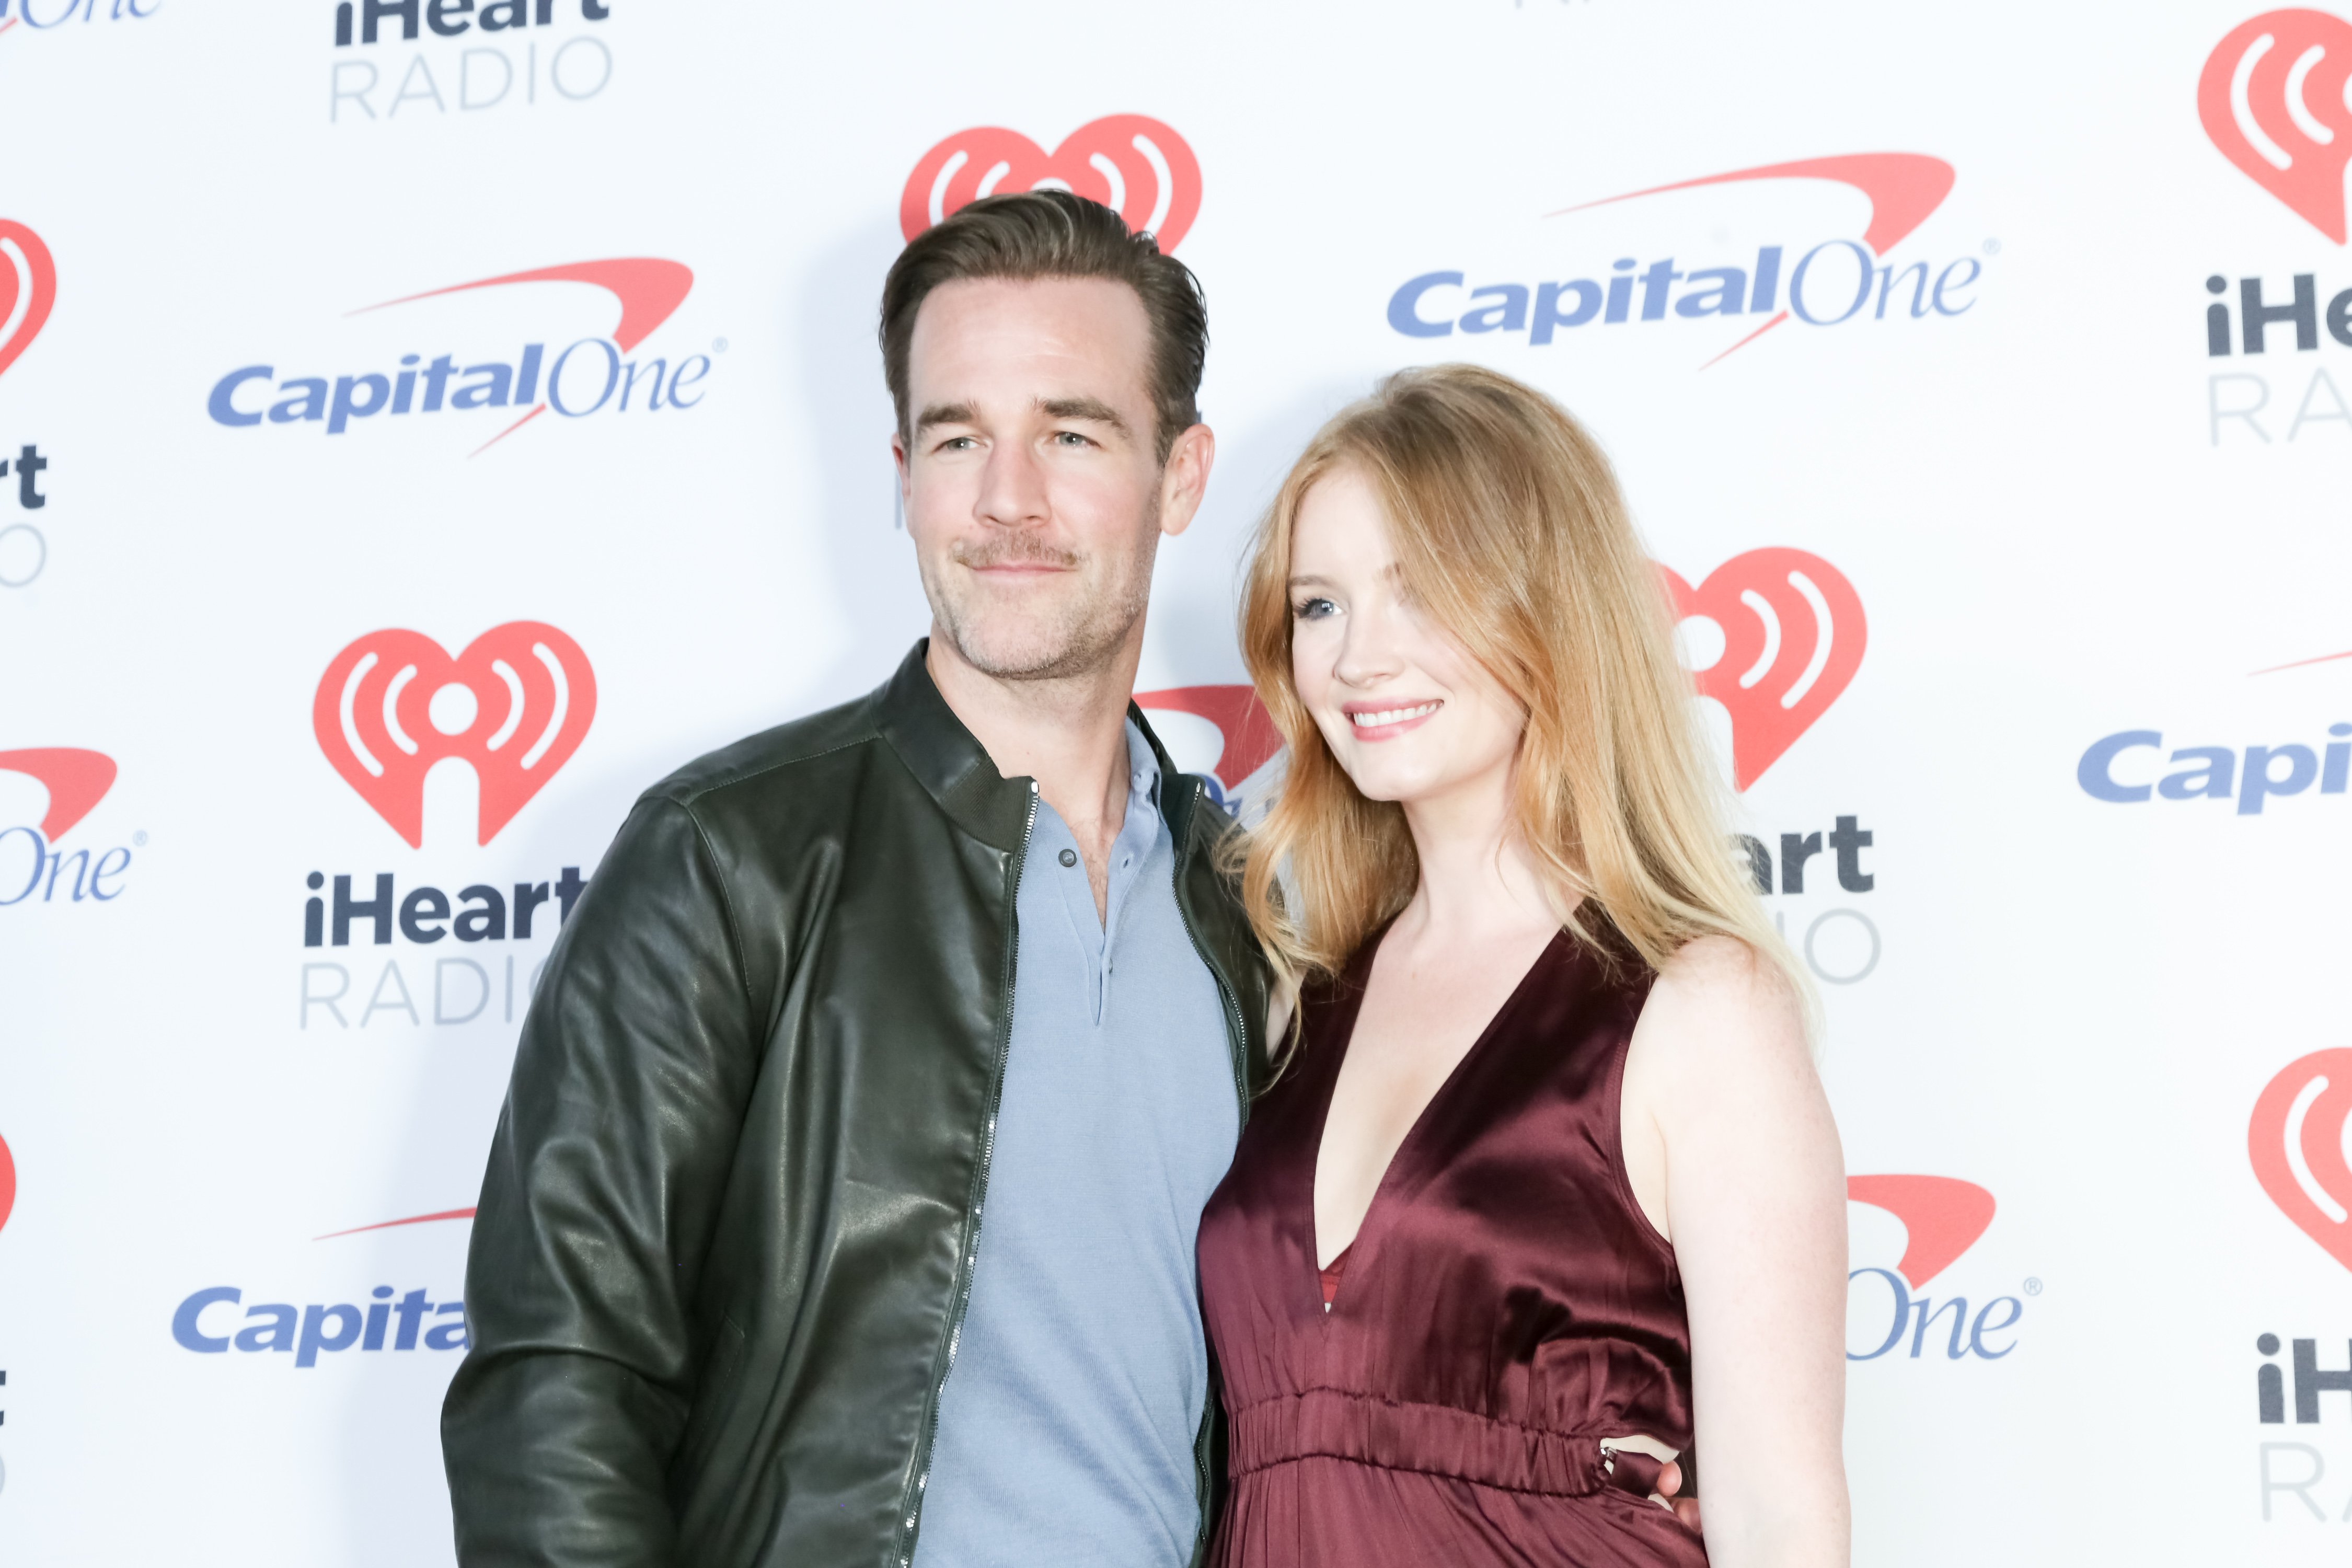 James Van Der Beek and wife Kimberly arrive at the 2017 iHeartRadio Music Festival in Las Vegas | Source: Getty Images